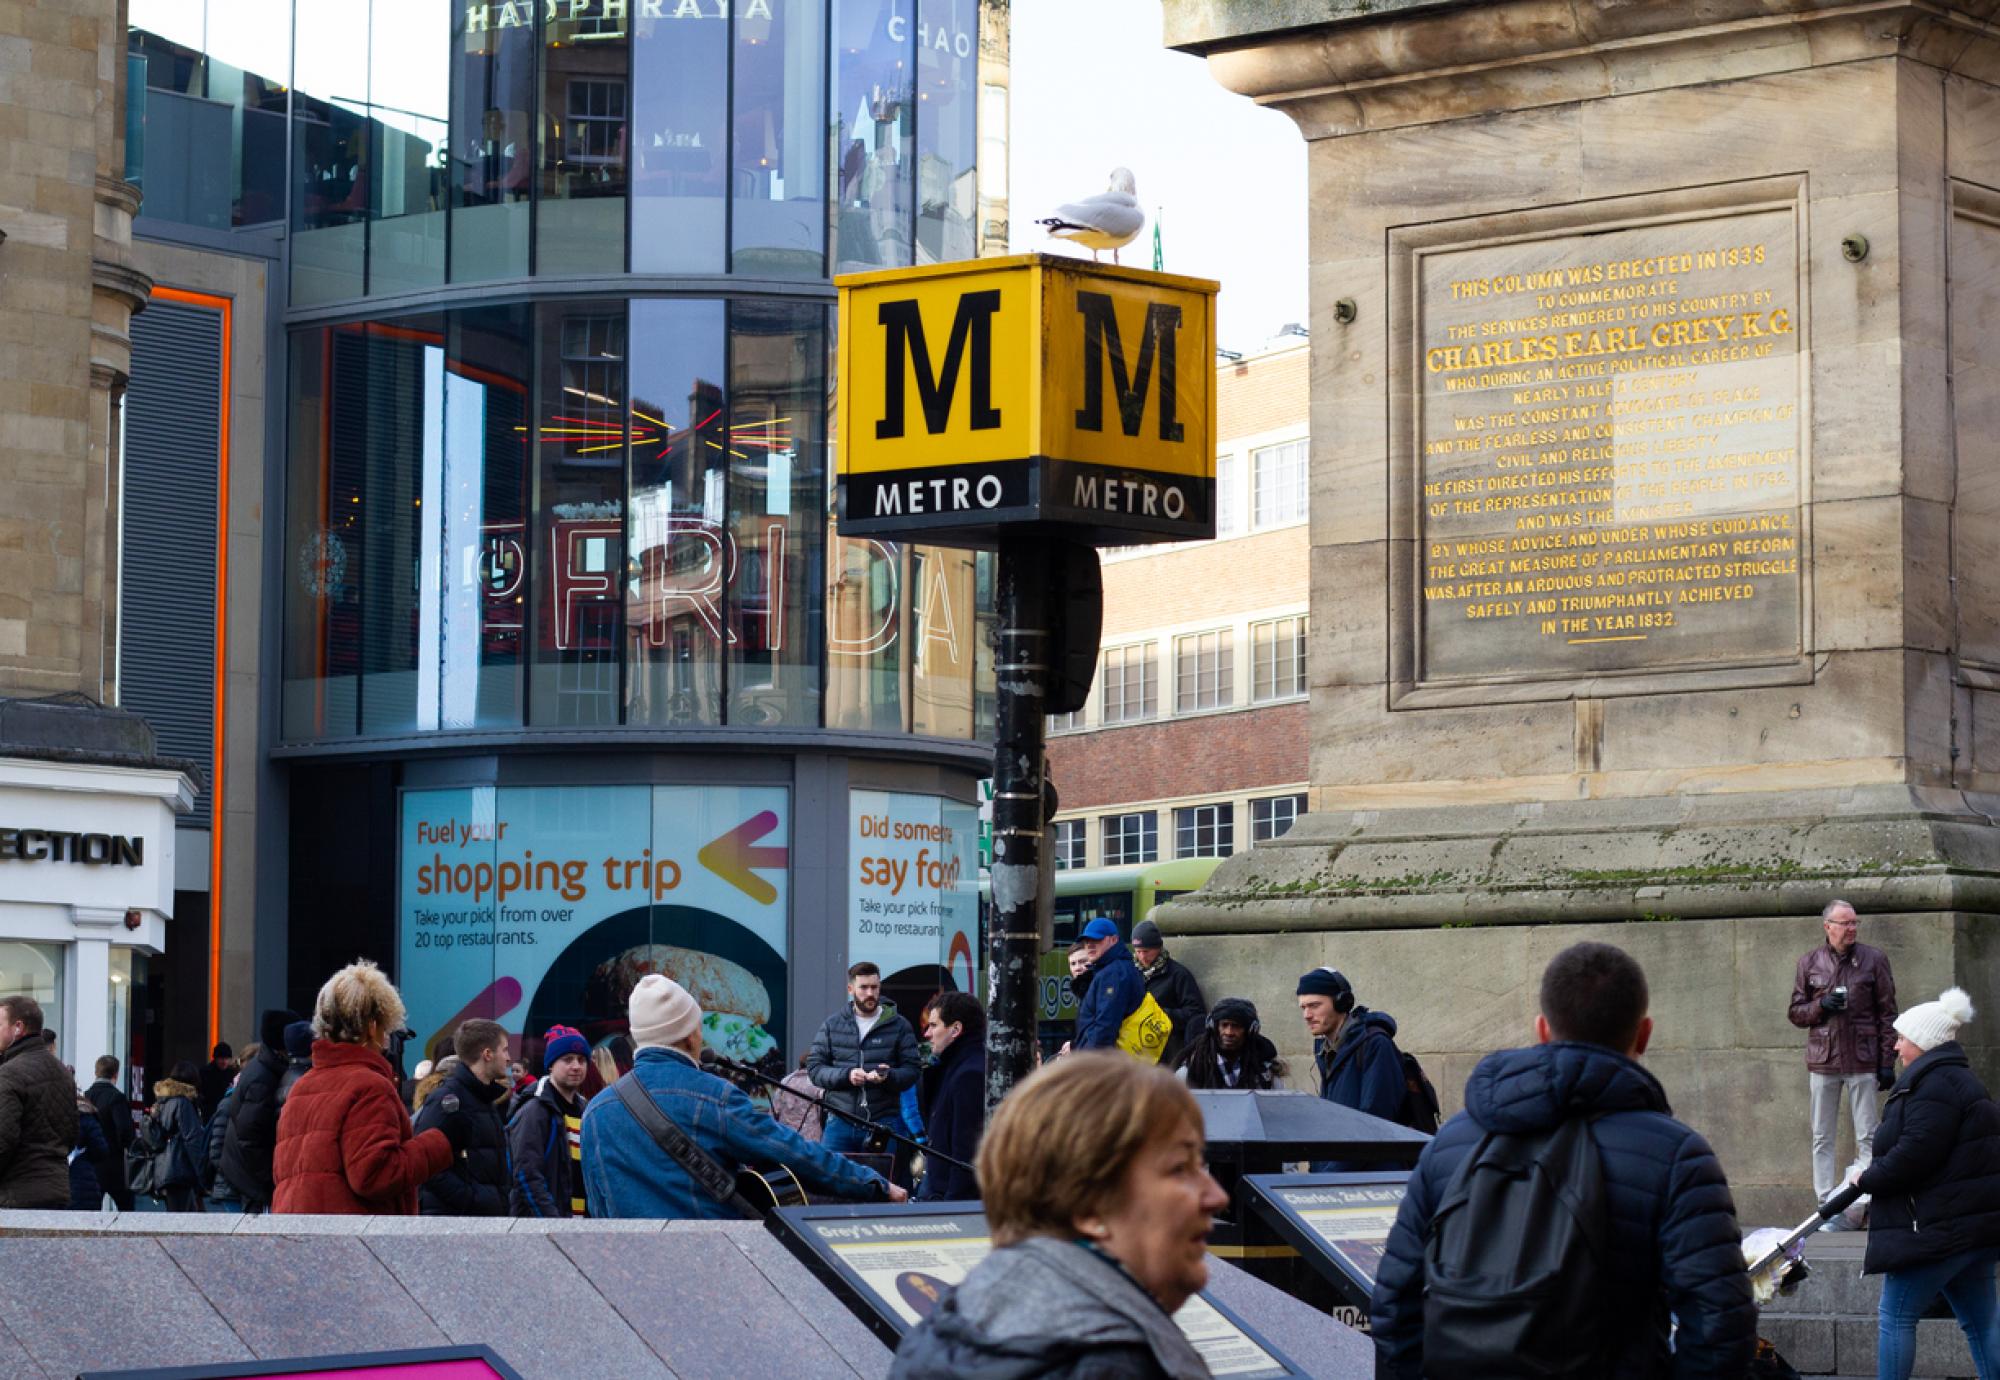 Tyne and Wear Metro begin testing new trains ahead of fleet rollout